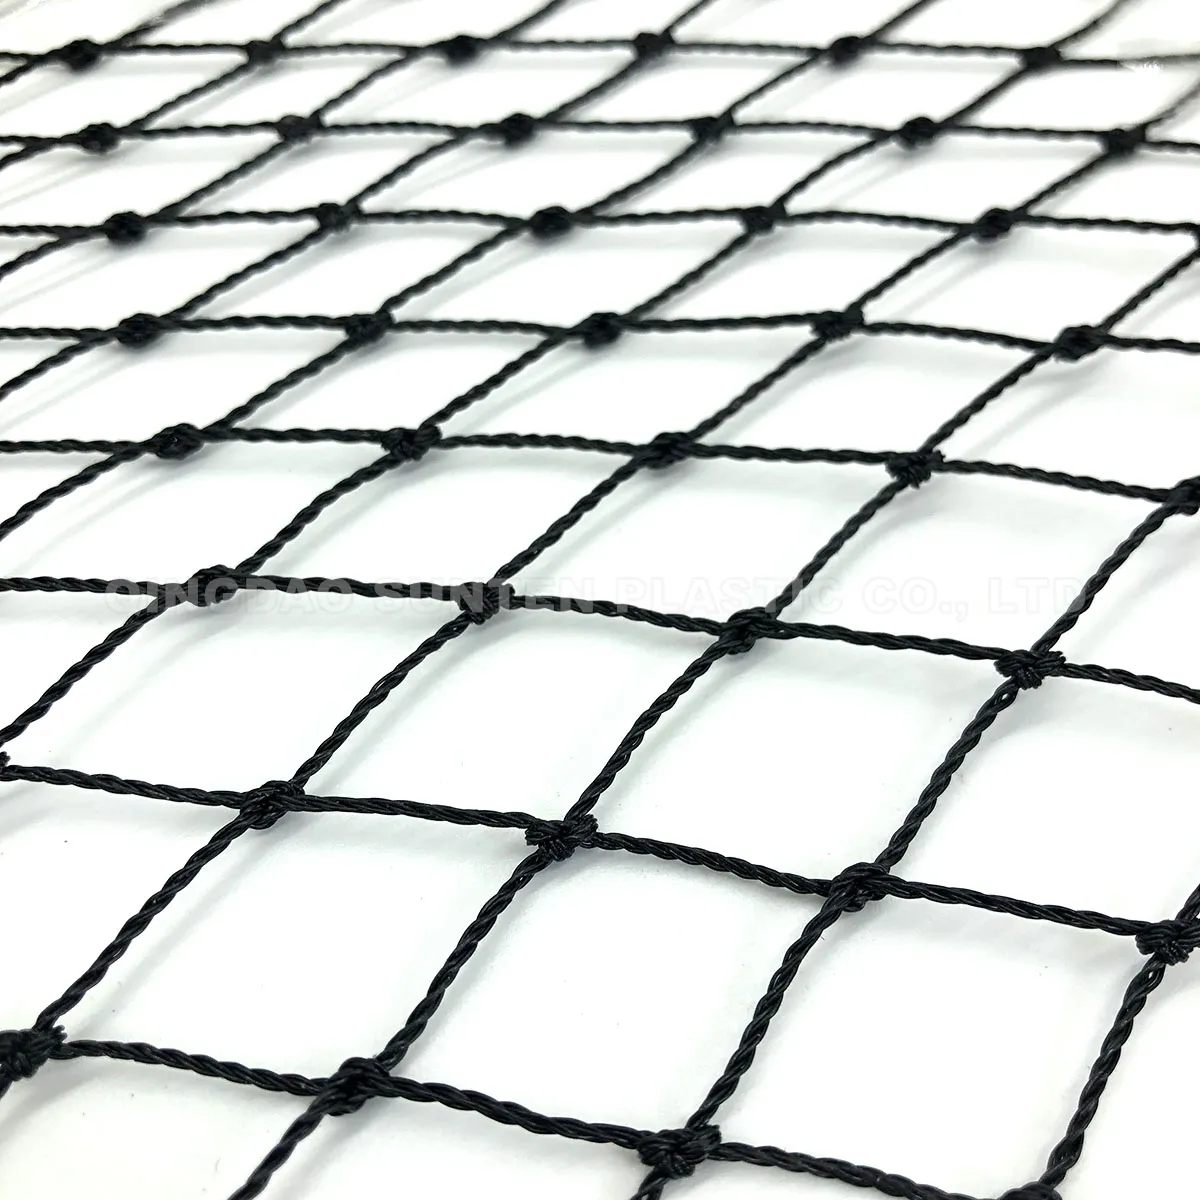 Knotted PE/Nylon/Plastic Agriculture/Garden/Vineyard Crop Protection/Control Chicken/Deer/Pigeon/Anti Bird Netting